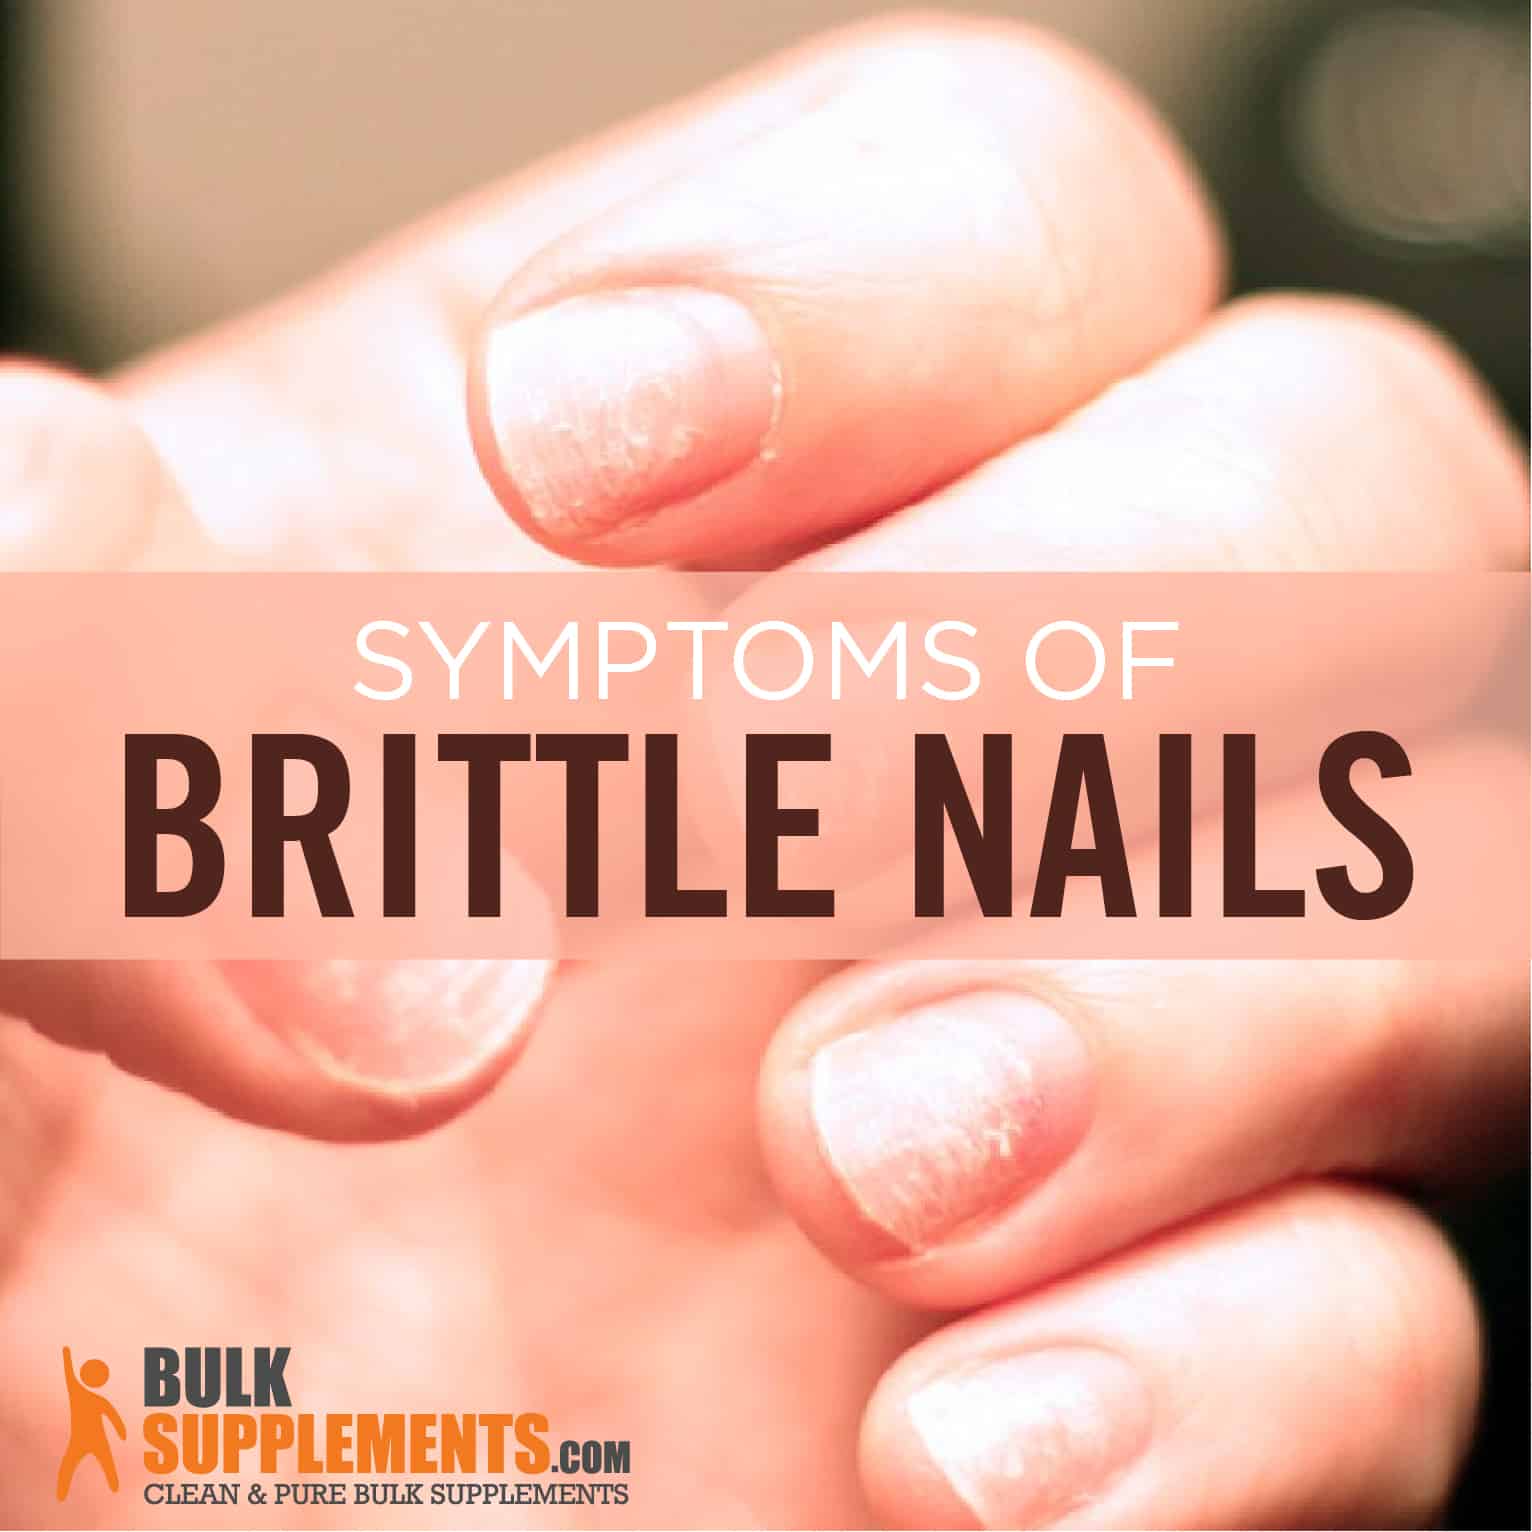 How to cure brittle nails at home - Quora